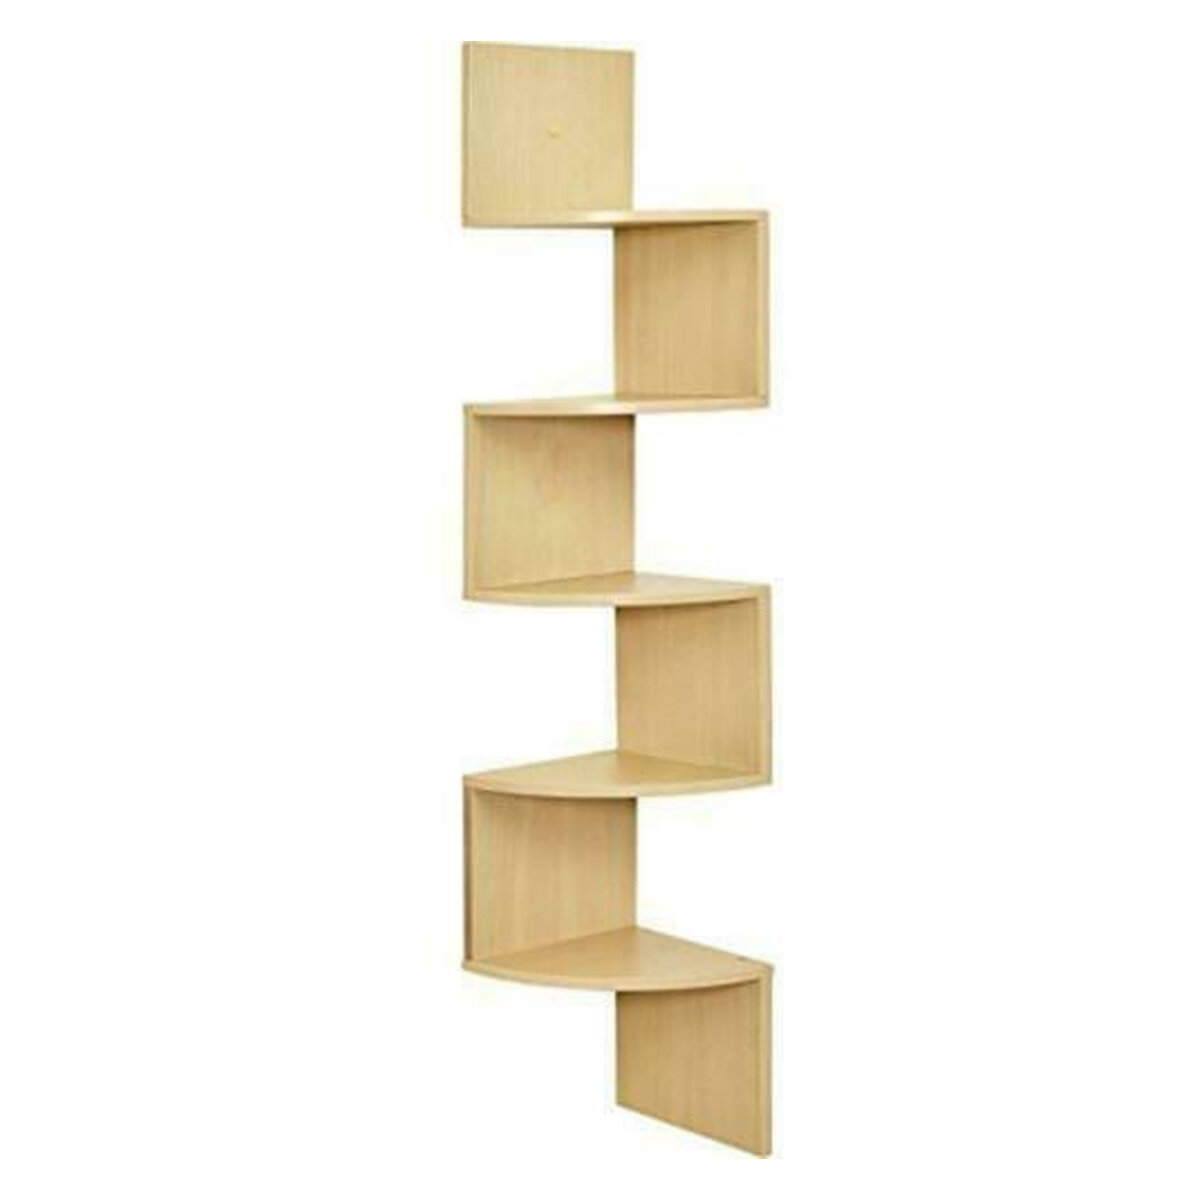 

5 Layers Wall Corner Bookshelf Storage Rack Wall Mounted Bookcase Space Saving Organizer for Home Office